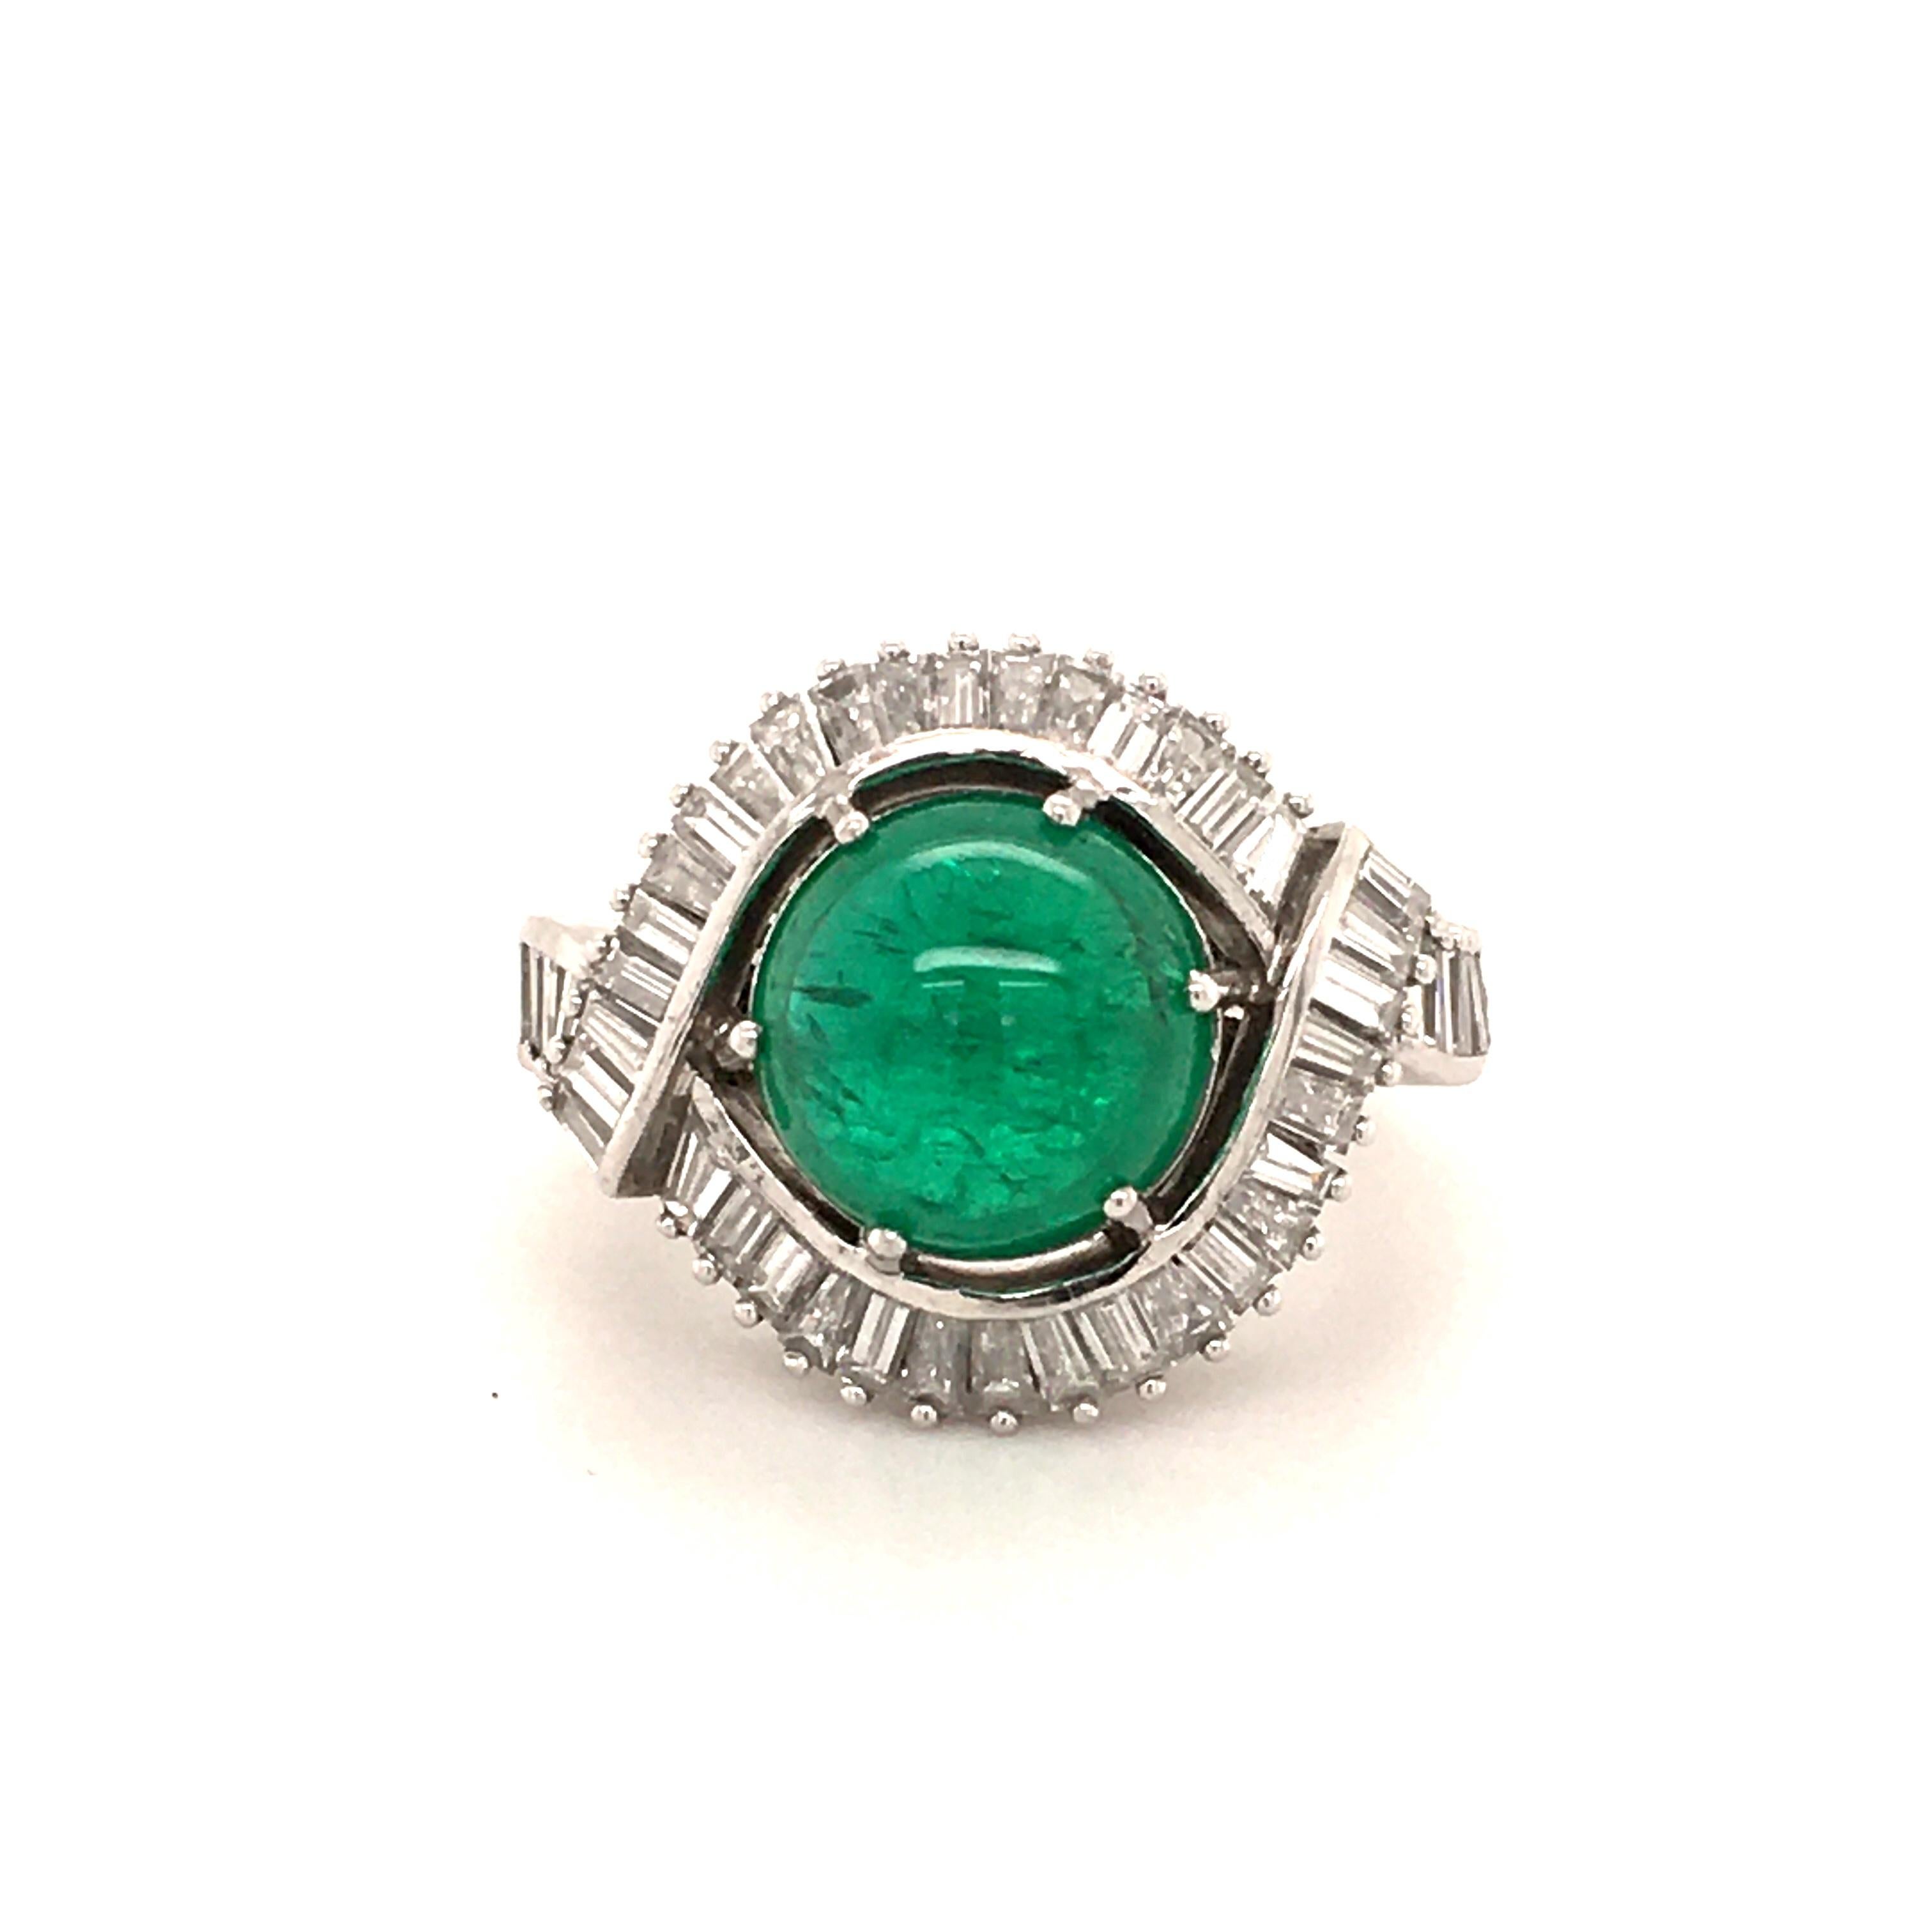 This elegant ring in platinum 950 features a beautiful Colombian cabochon cut emerald of 5.69 carats. Surrounded by two curved lines set with 46 baguette shaped diamonds of H/I colour and vvs/vs clarity, total weight approximately 2.50 carats.

Ring